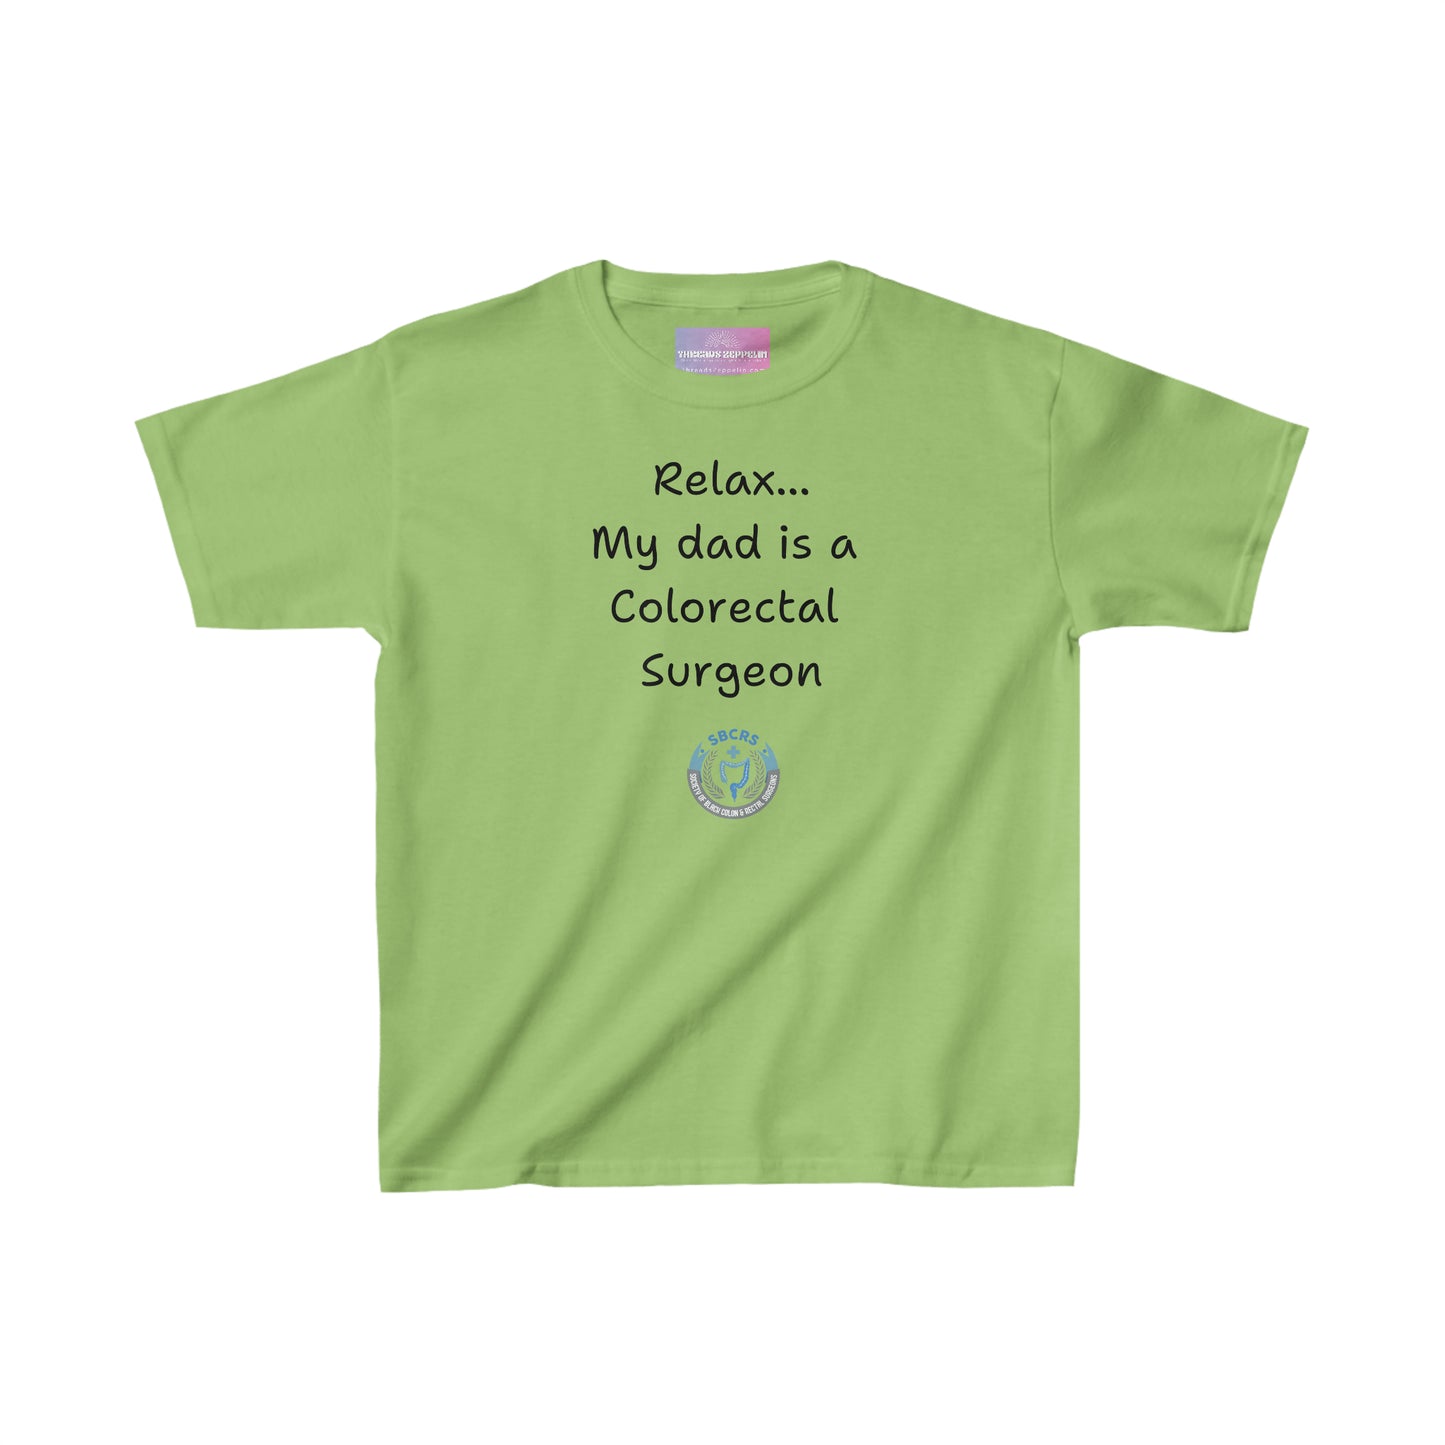 Relax, My Dad is a Colorectal Surgeon, Kids Heavy Cotton Tee